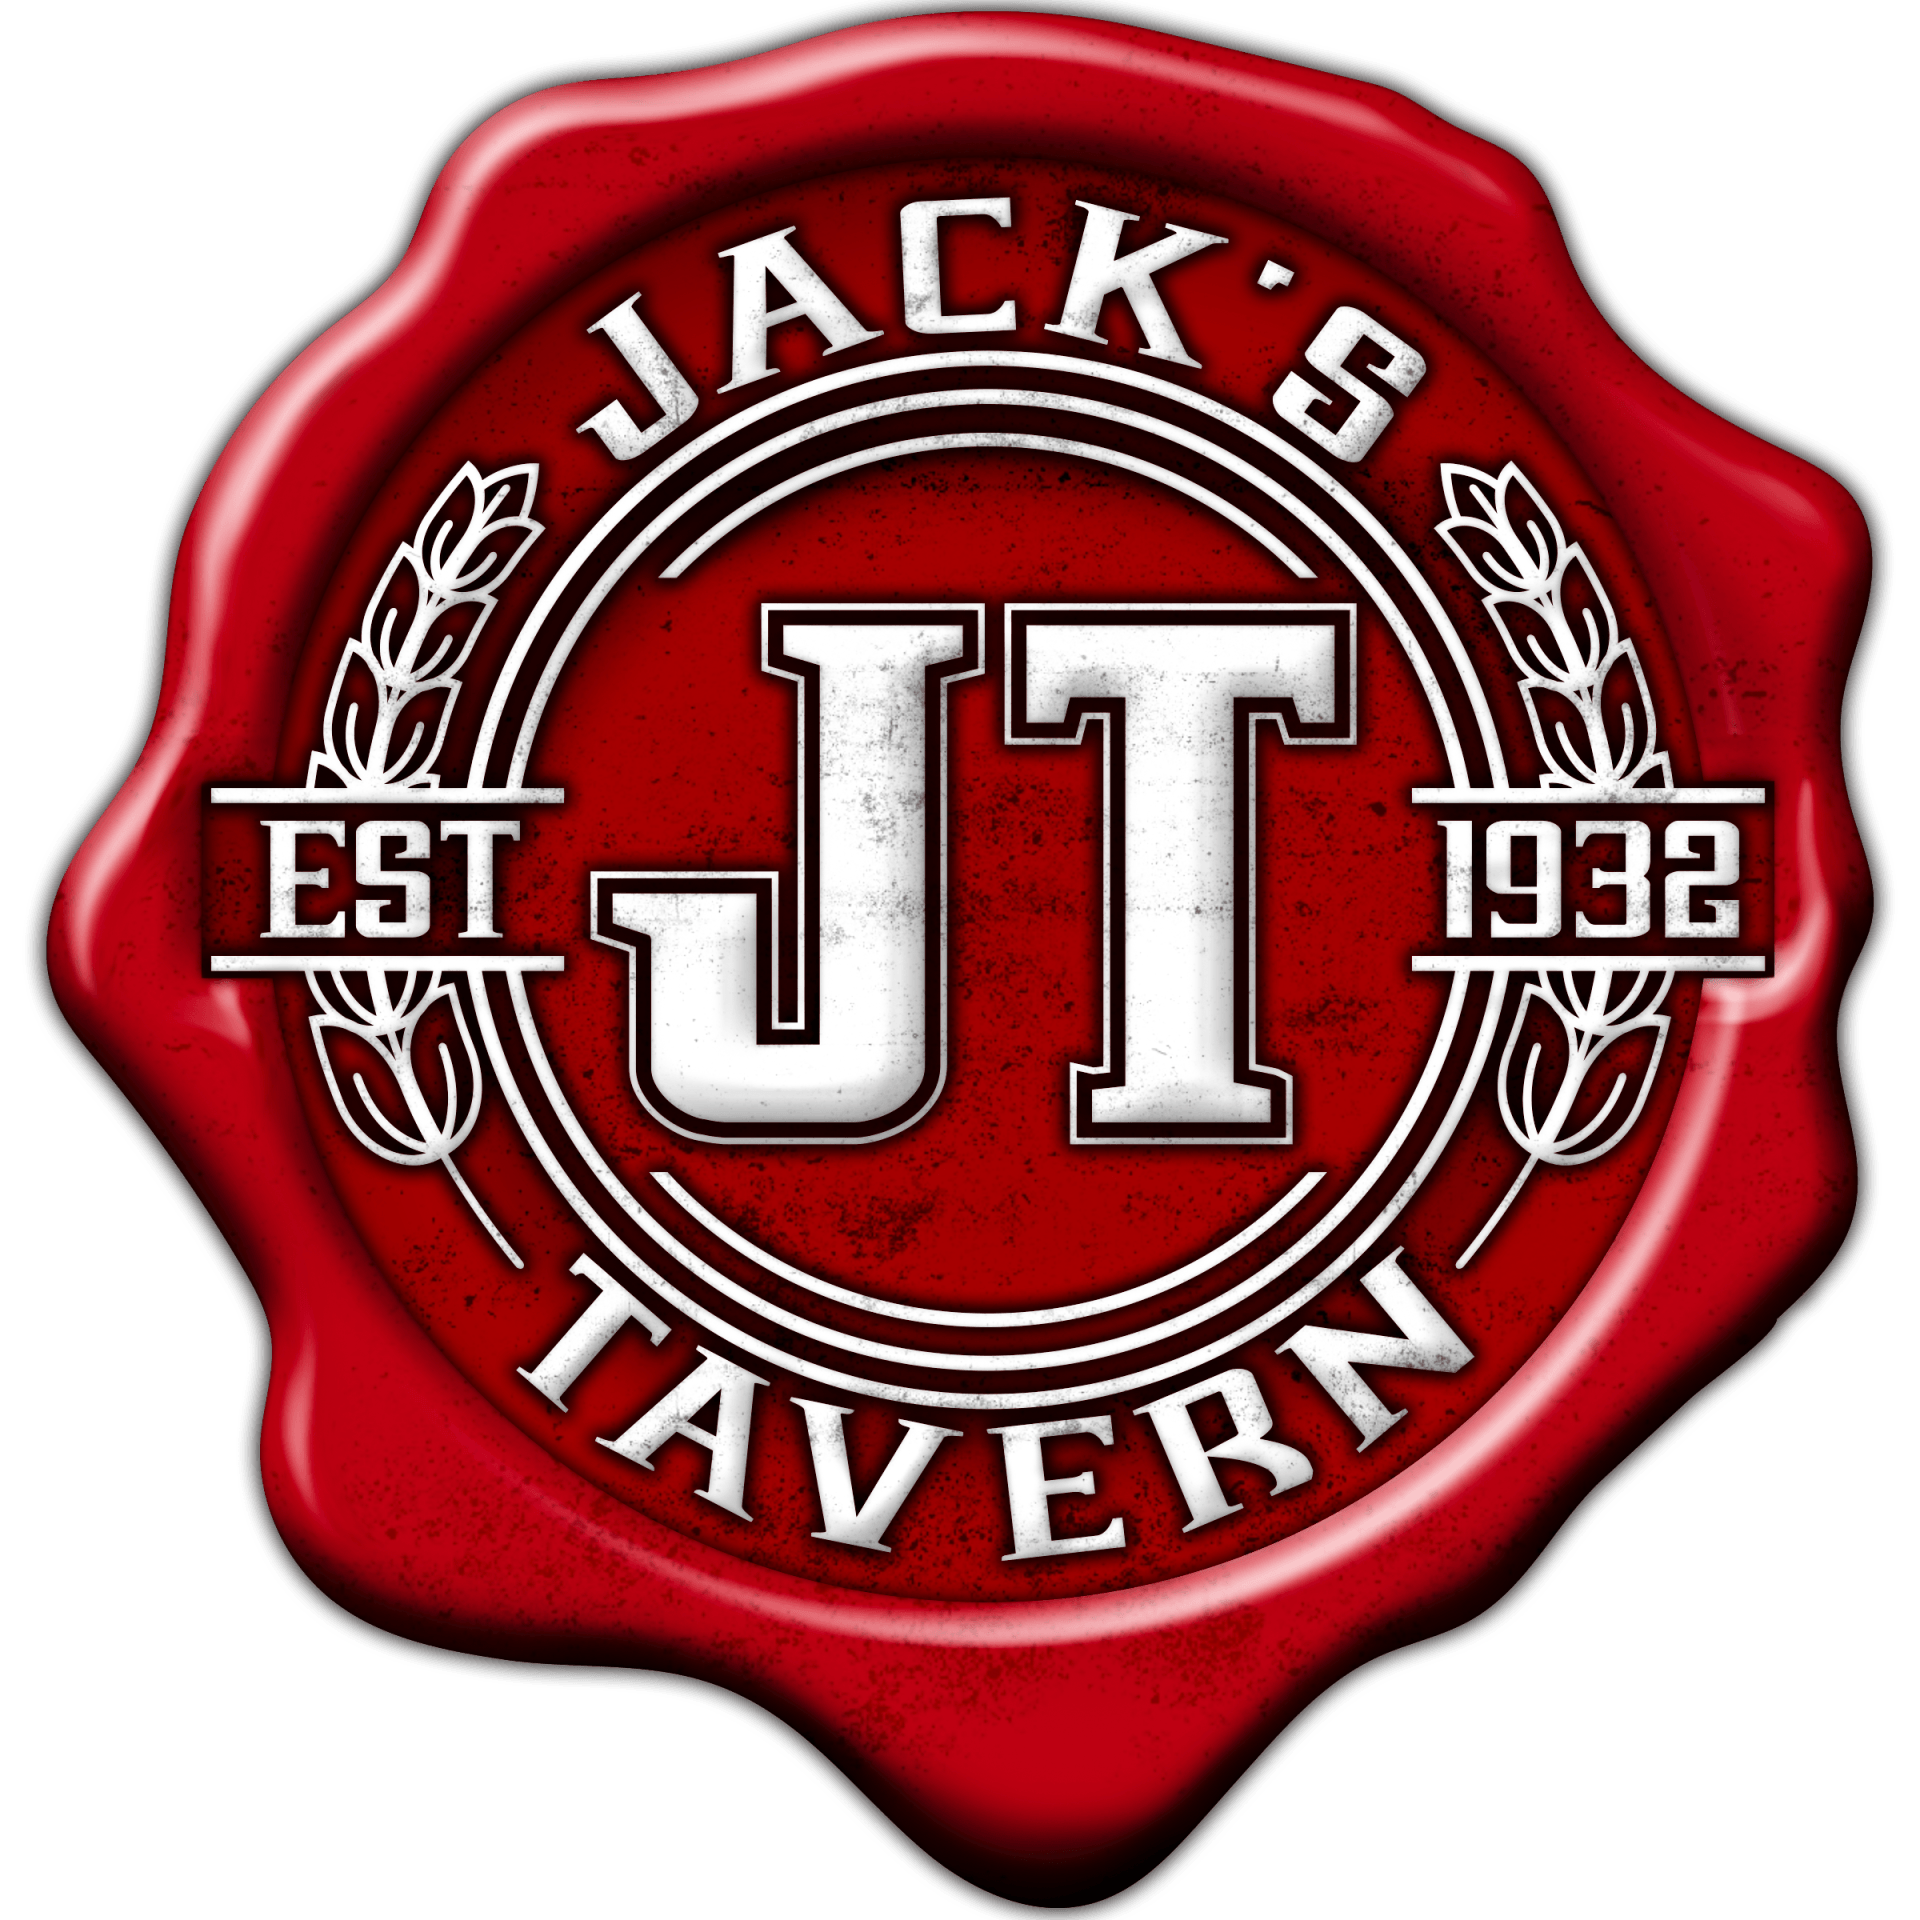 the logo for jack 's tavern is a red wax seal